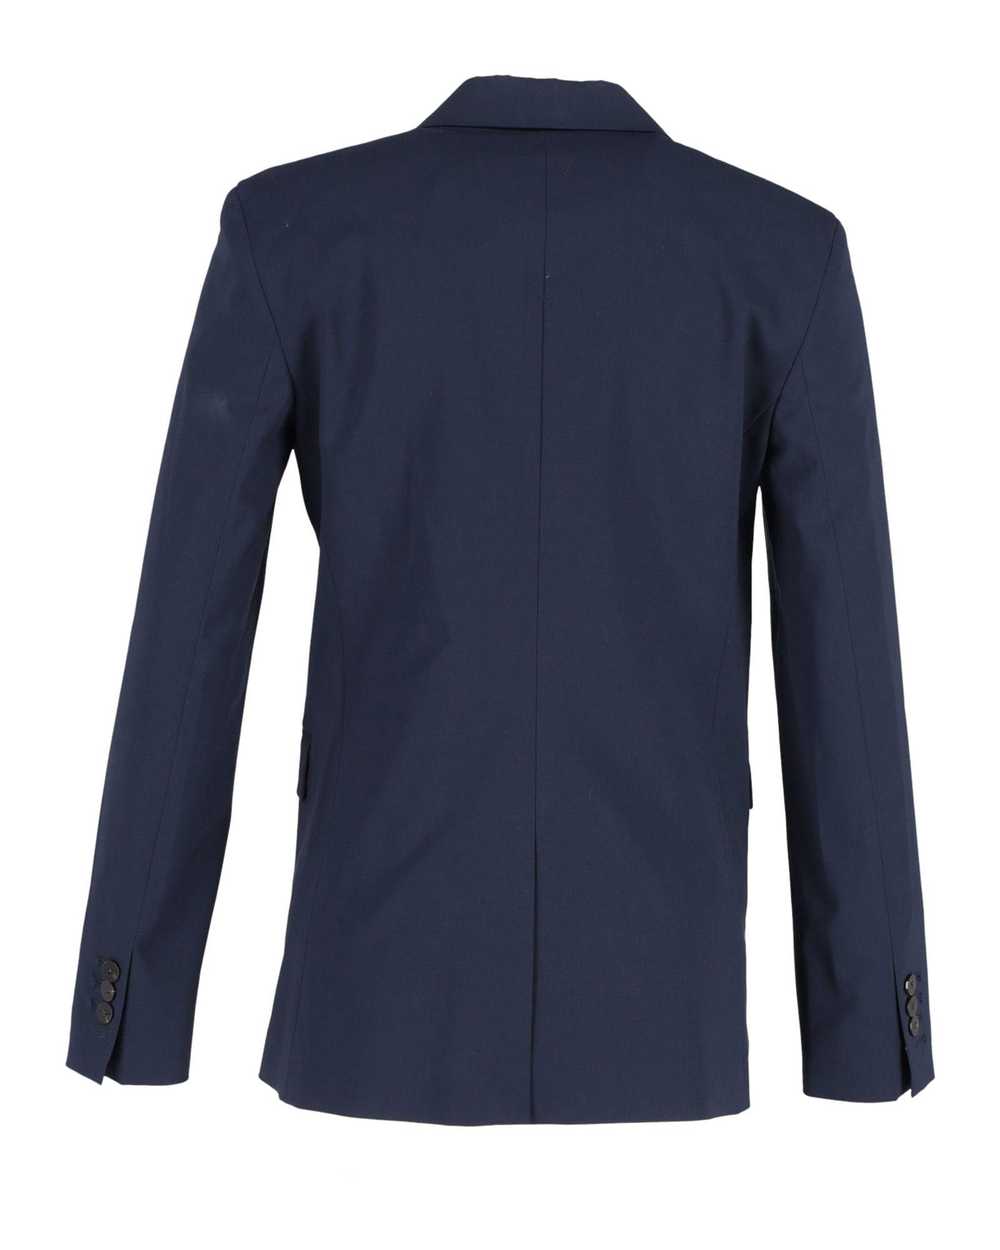 Theory Navy Blue Single-Breasted Blazer Jacket in… - image 3